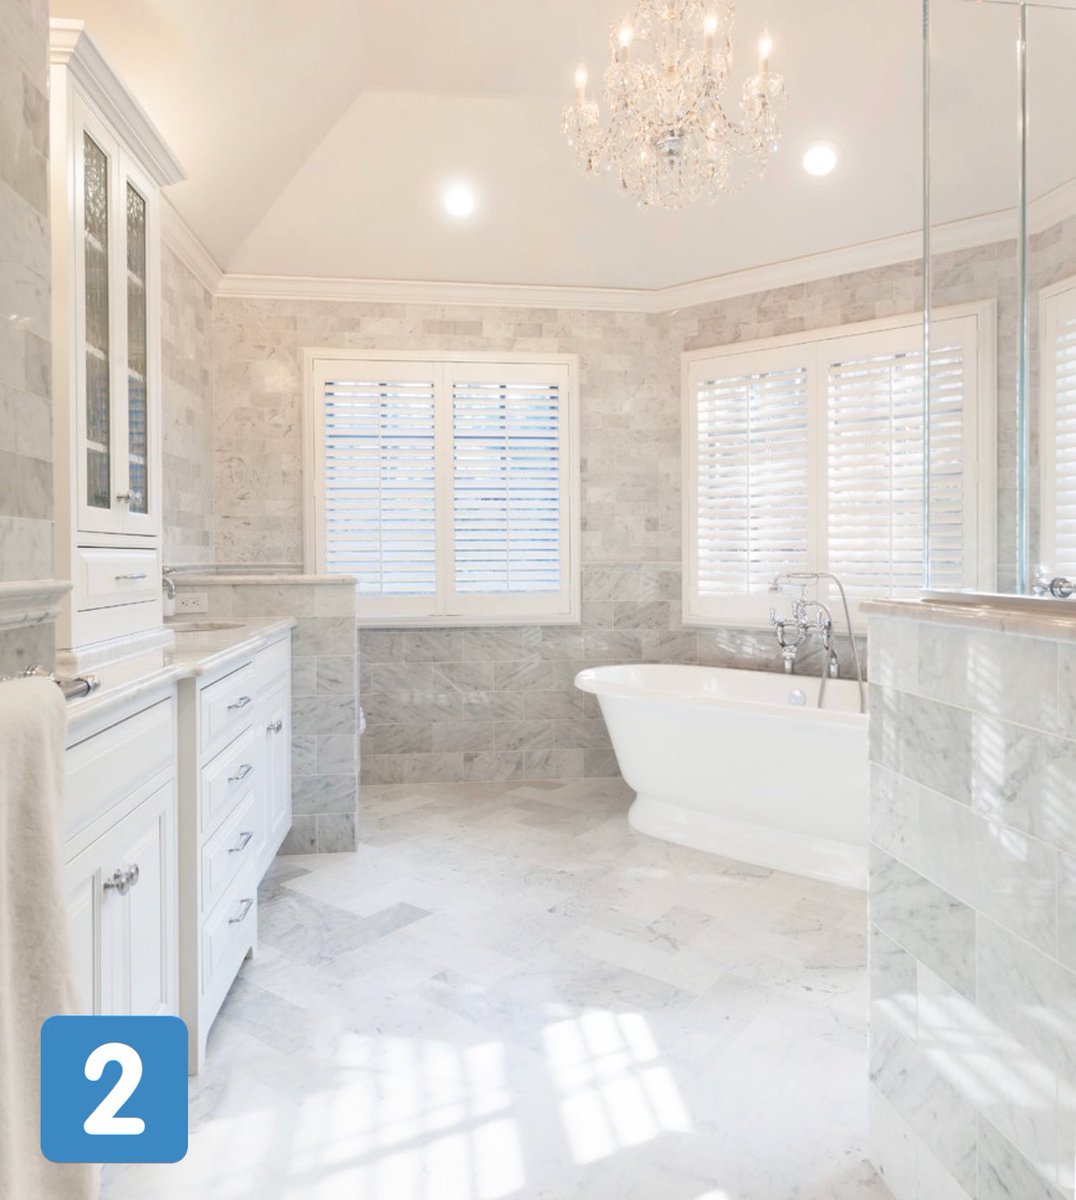 What’s your style bathroom?1. Contemporary2. Traditional3. Industrial4. Farmhouse